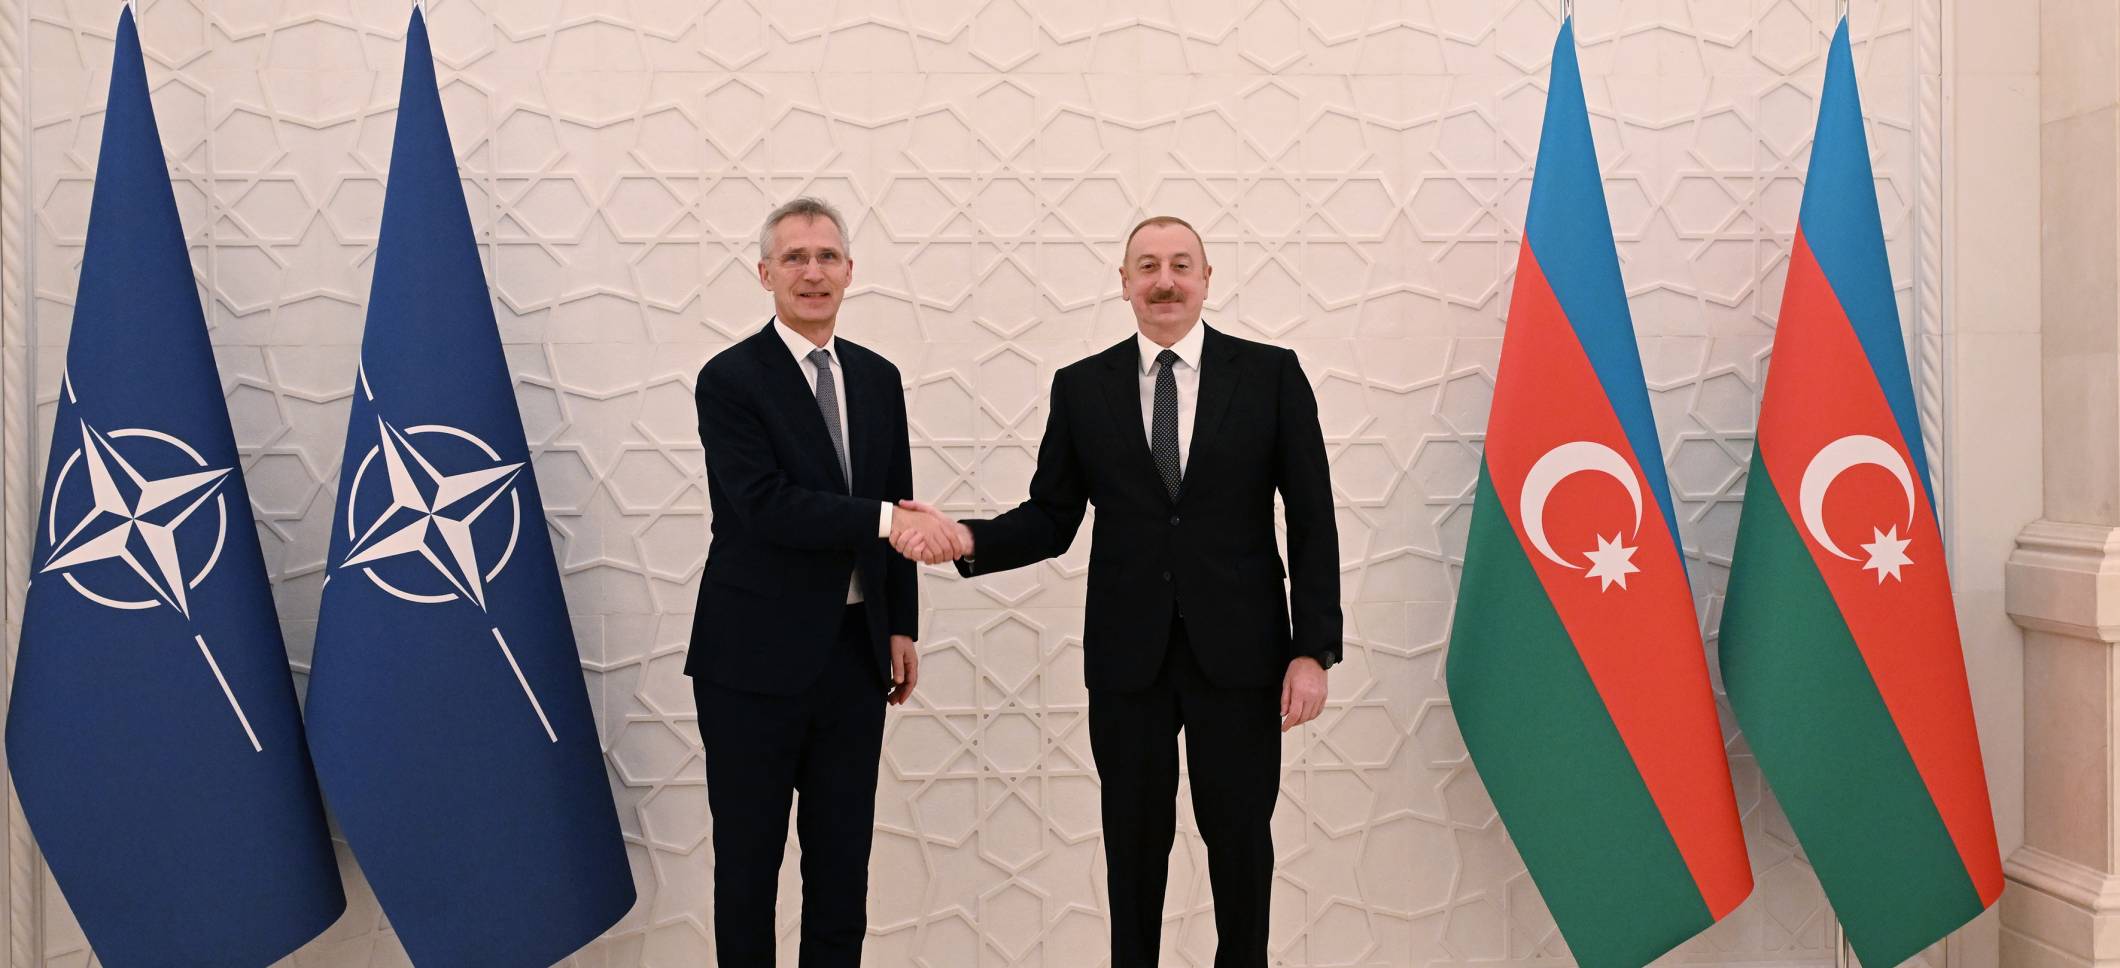 Ilham Aliyev held one-on-one meeting with NATO Secretary General Jens Stoltenberg